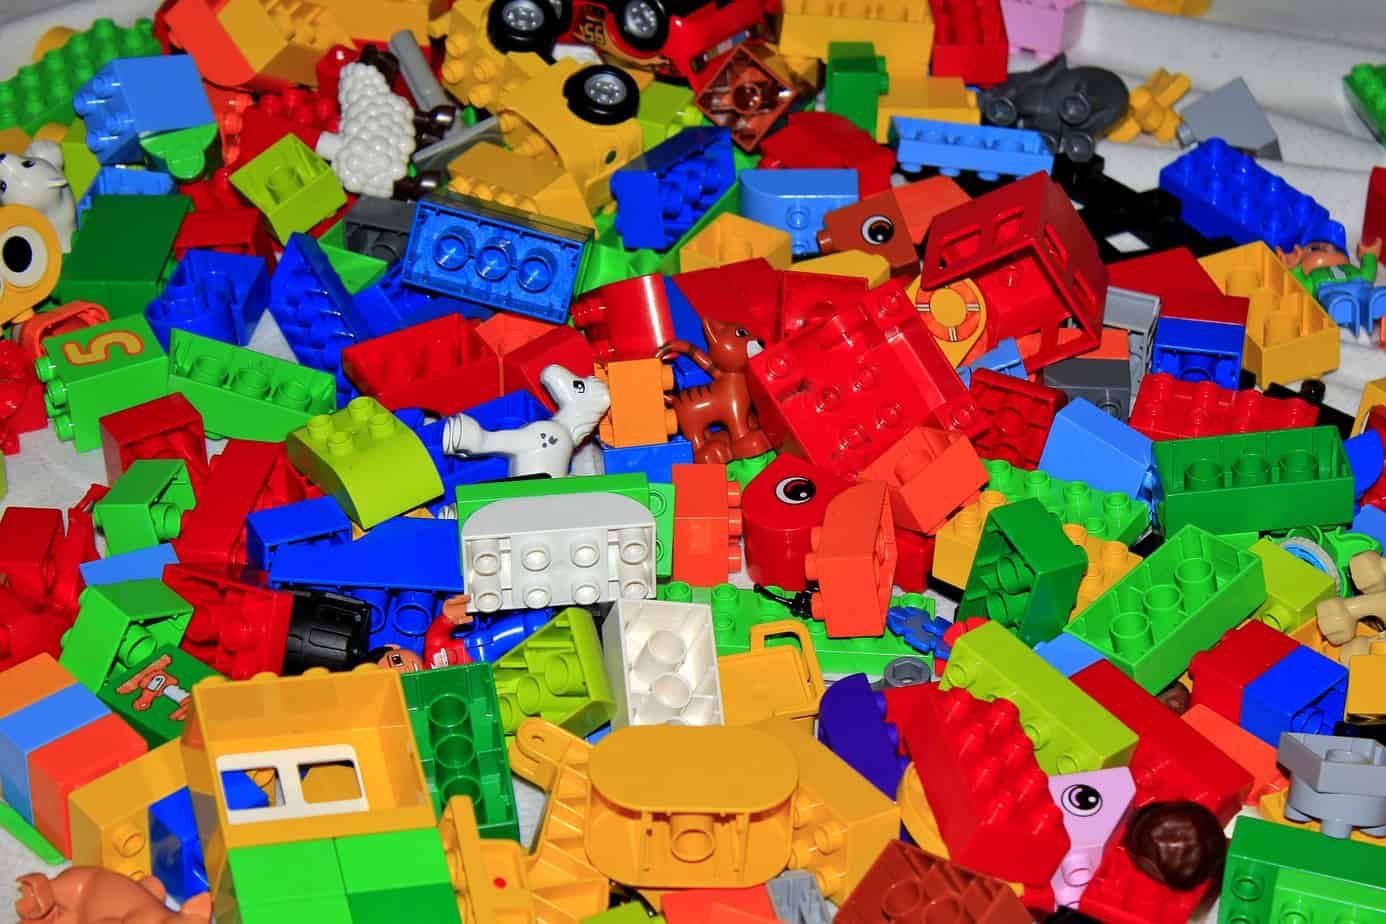 How Many Kinds of Toy Building Blocks are There?